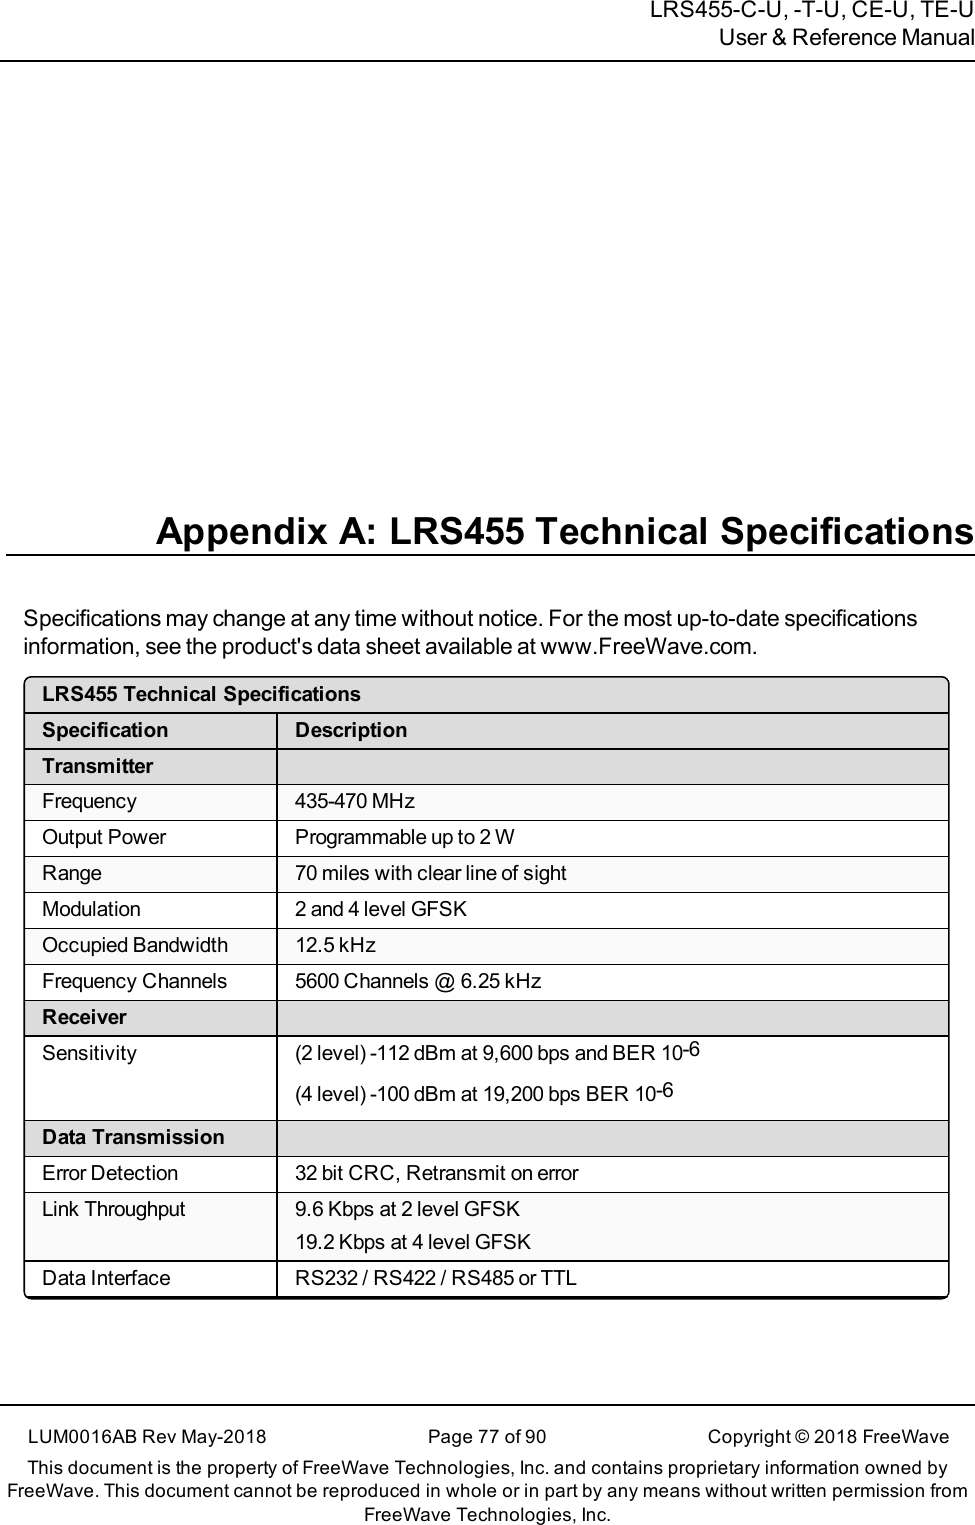 LRS455-C-U, -T-U, CE-U, TE-UUser &amp; Reference ManualAppendix A: LRS455 Technical SpecificationsSpecifications may change at any time without notice. For the most up-to-date specificationsinformation, see the product&apos;s data sheet available at www.FreeWave.com.LRS455 Technical SpecificationsSpecification DescriptionTransmitterFrequency 435-470 MHzOutput Power Programmable up to 2 WRange 70 miles with clear line of sightModulation 2 and 4 level GFSKOccupied Bandwidth 12.5 kHzFrequency Channels 5600 Channels @ 6.25 kHzReceiverSensitivity (2 level) -112 dBm at 9,600 bps and BER 10-6(4 level) -100 dBm at 19,200 bps BER 10-6Data TransmissionError Detection 32 bit CRC, Retransmit on errorLink Throughput 9.6 Kbps at 2 level GFSK19.2 Kbps at 4 level GFSKData Interface RS232 / RS422 / RS485 or TTLLUM0016AB Rev May-2018 Page 77 of 90 Copyright © 2018FreeWaveThis document is the property of FreeWave Technologies, Inc. and contains proprietary information owned byFreeWave. This document cannot be reproduced in whole or in part by any means without written permission fromFreeWave Technologies, Inc.